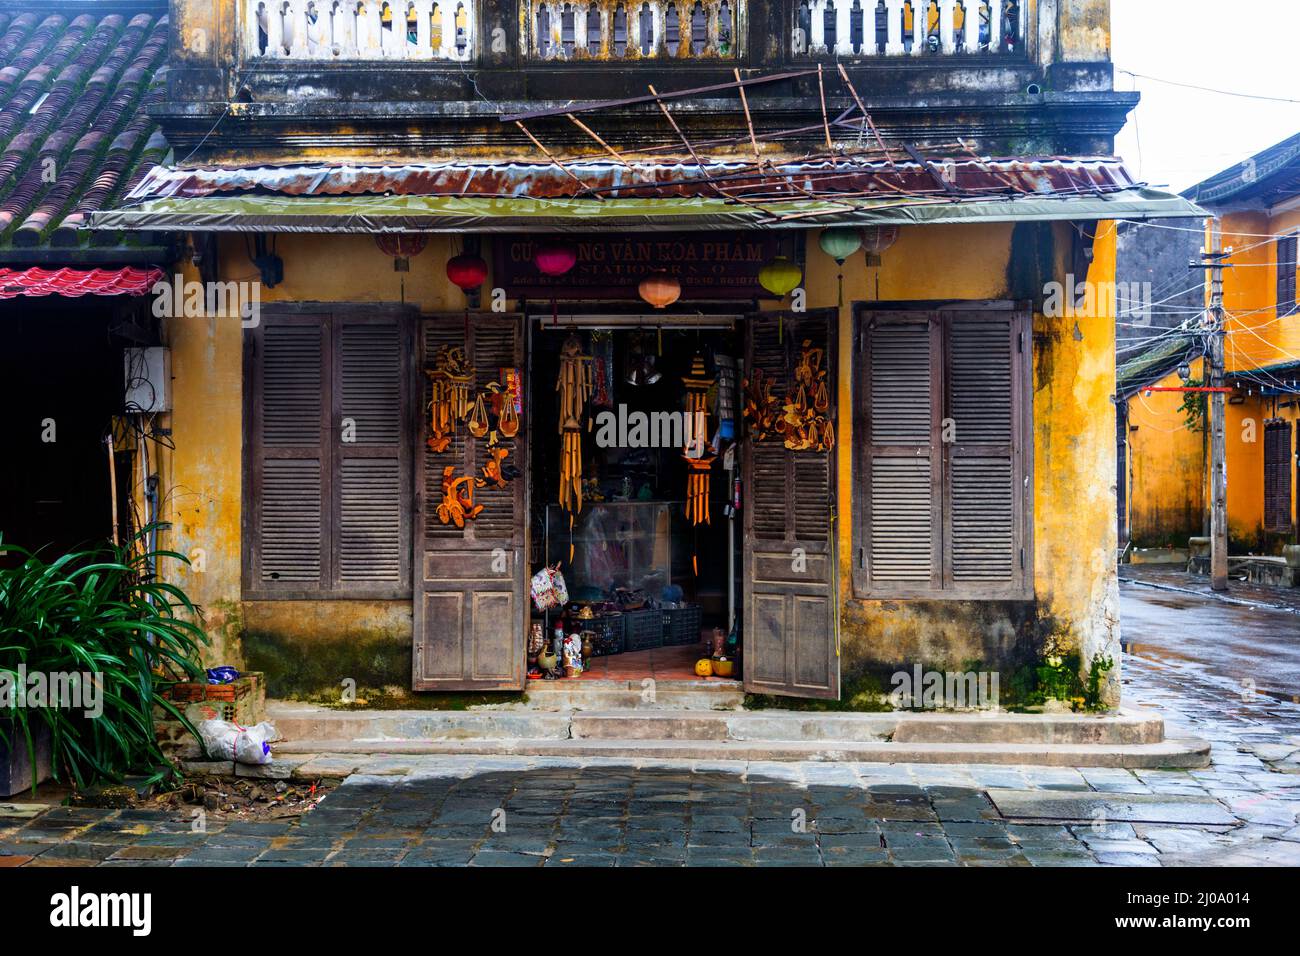 A corner store in Old Town, Ancient City of Hoi An, VN Stock Photo